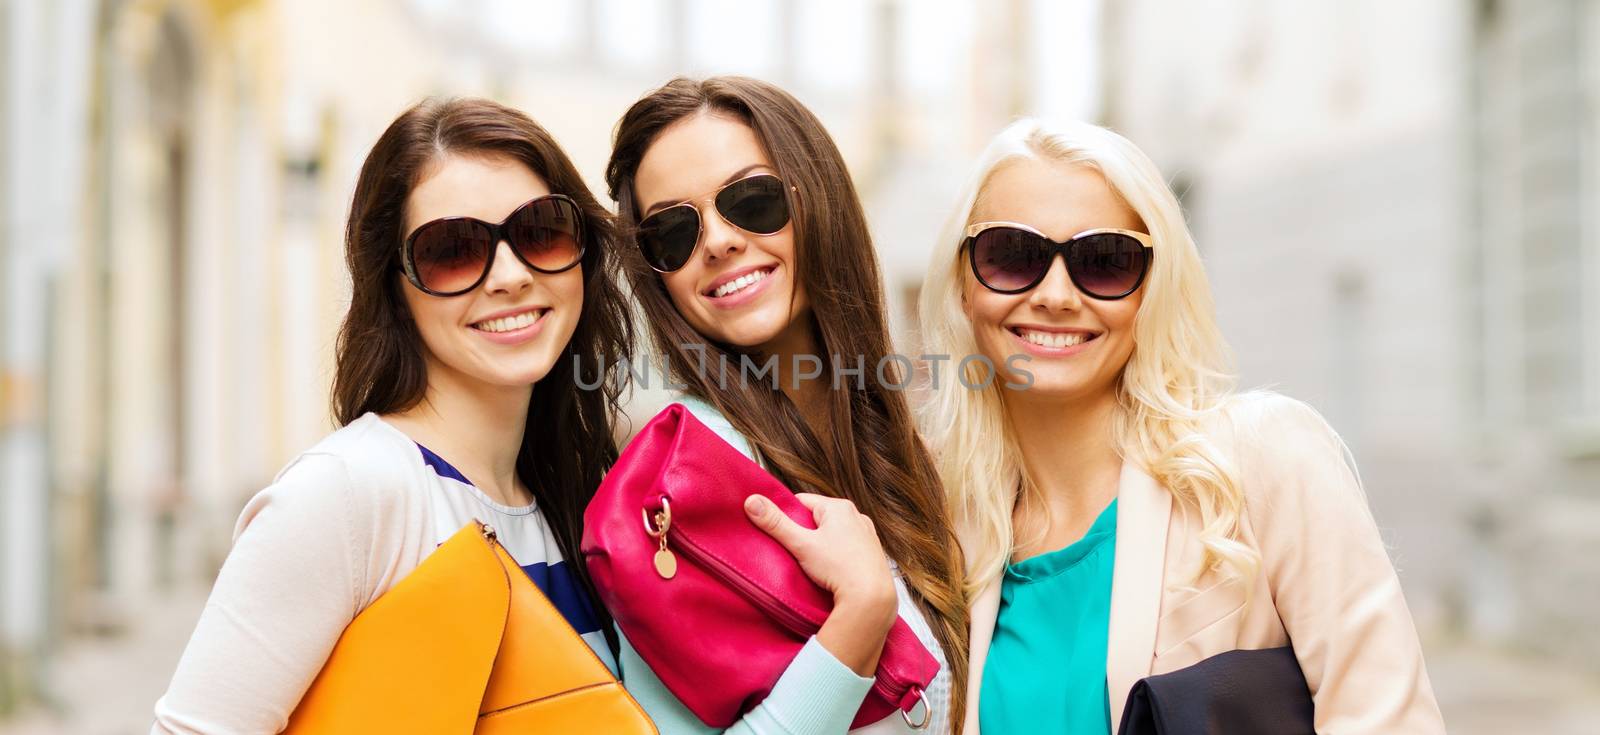 three smiling women with bags in the city by dolgachov